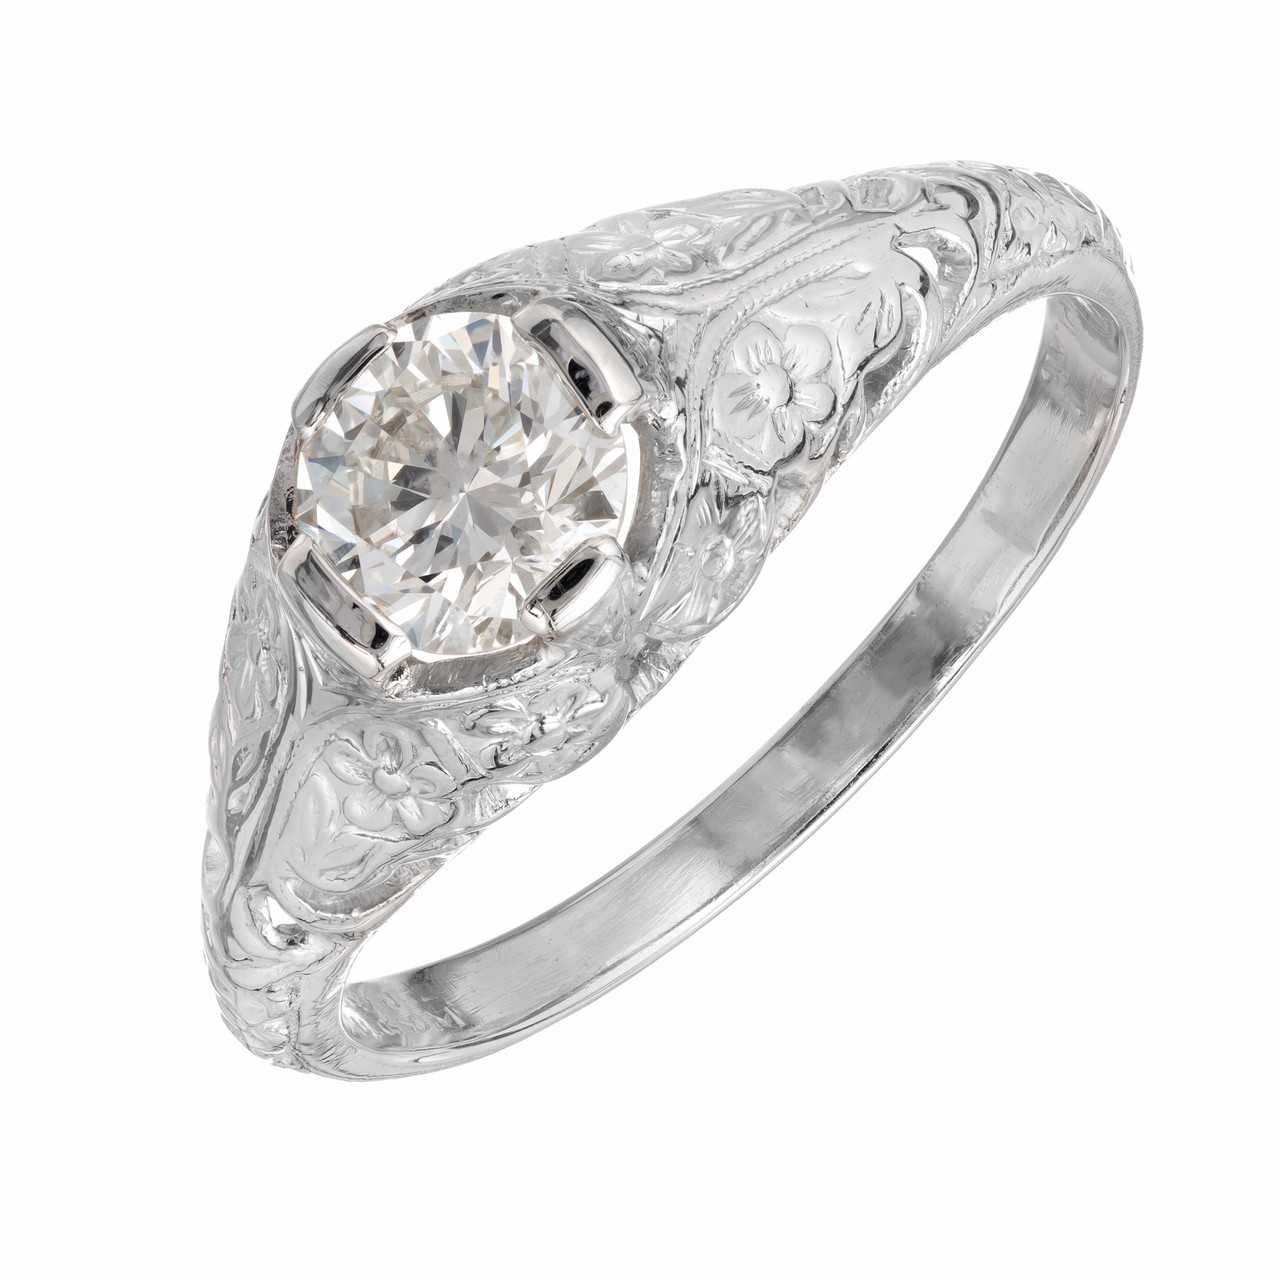 Timeless 1940s Solitaire Engagement Ring of the Week